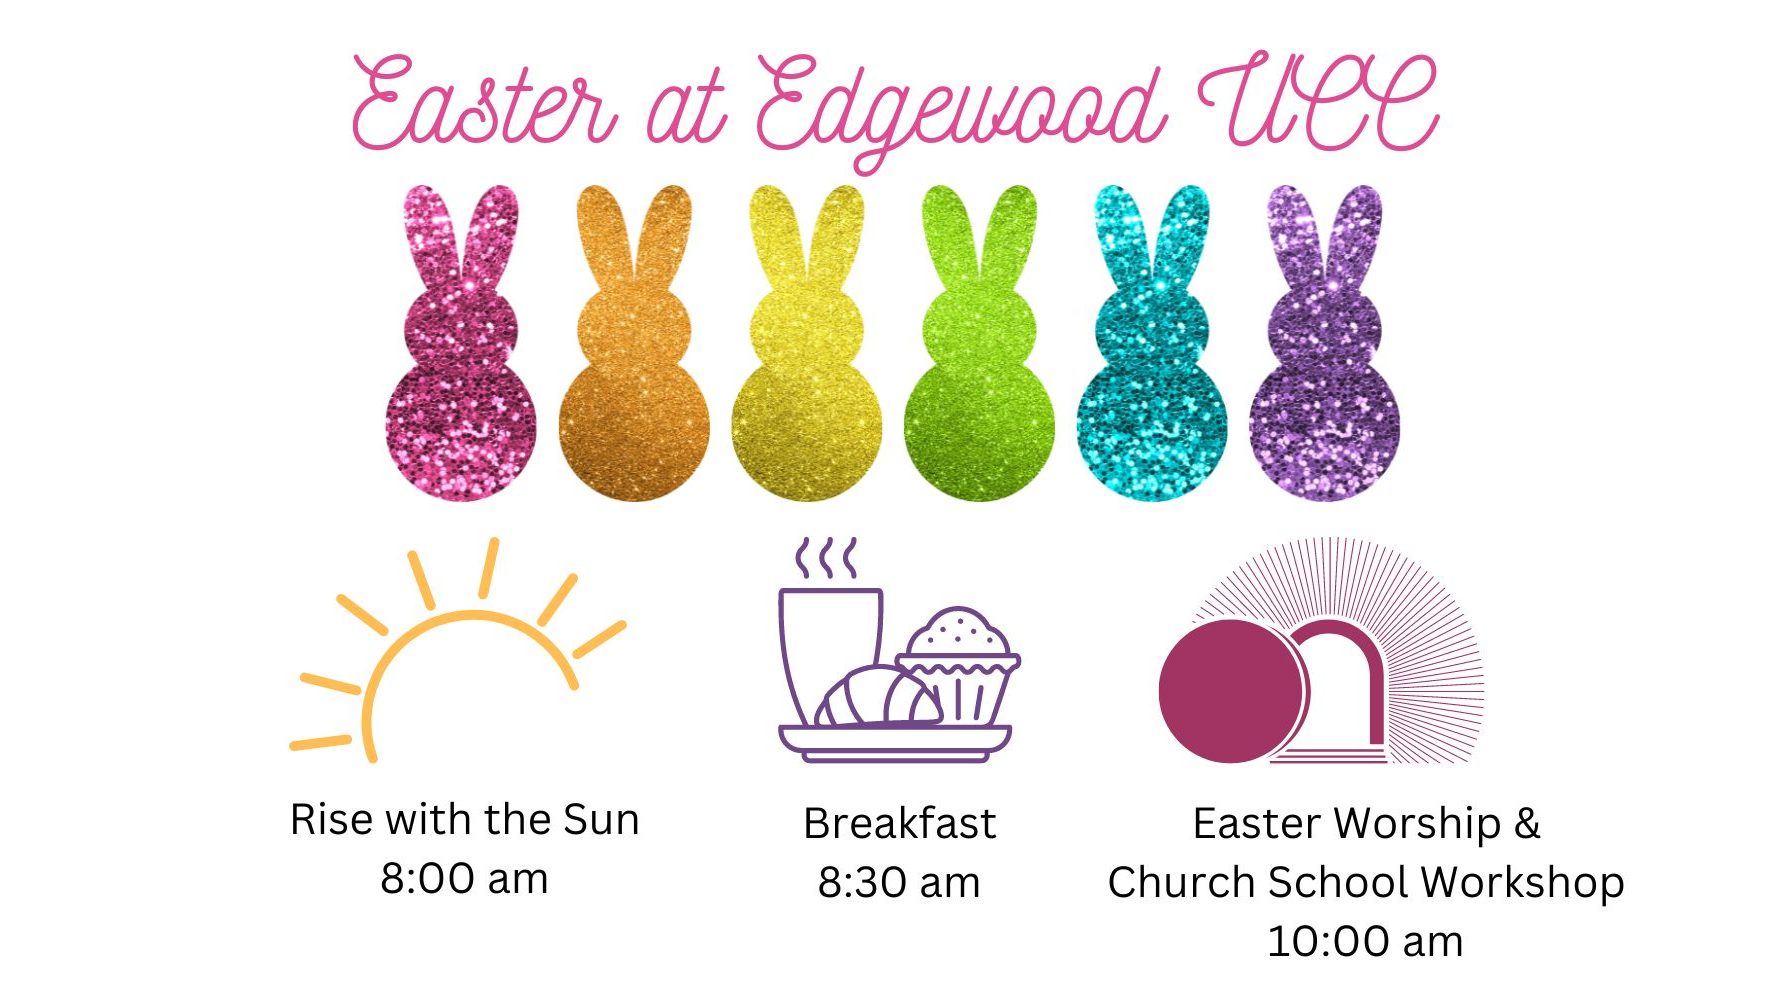 Image of glittery rainbow peeps with words, "Easter at Edgewood UCC." Graphic of a sun with "Rise with the Sun, 8:00 am." Graphic of breakfast items with "Breakfast, 8:30 am." Graphic of an empty tomb with "Easter Worship and Church School Workshop, 10:00 am."